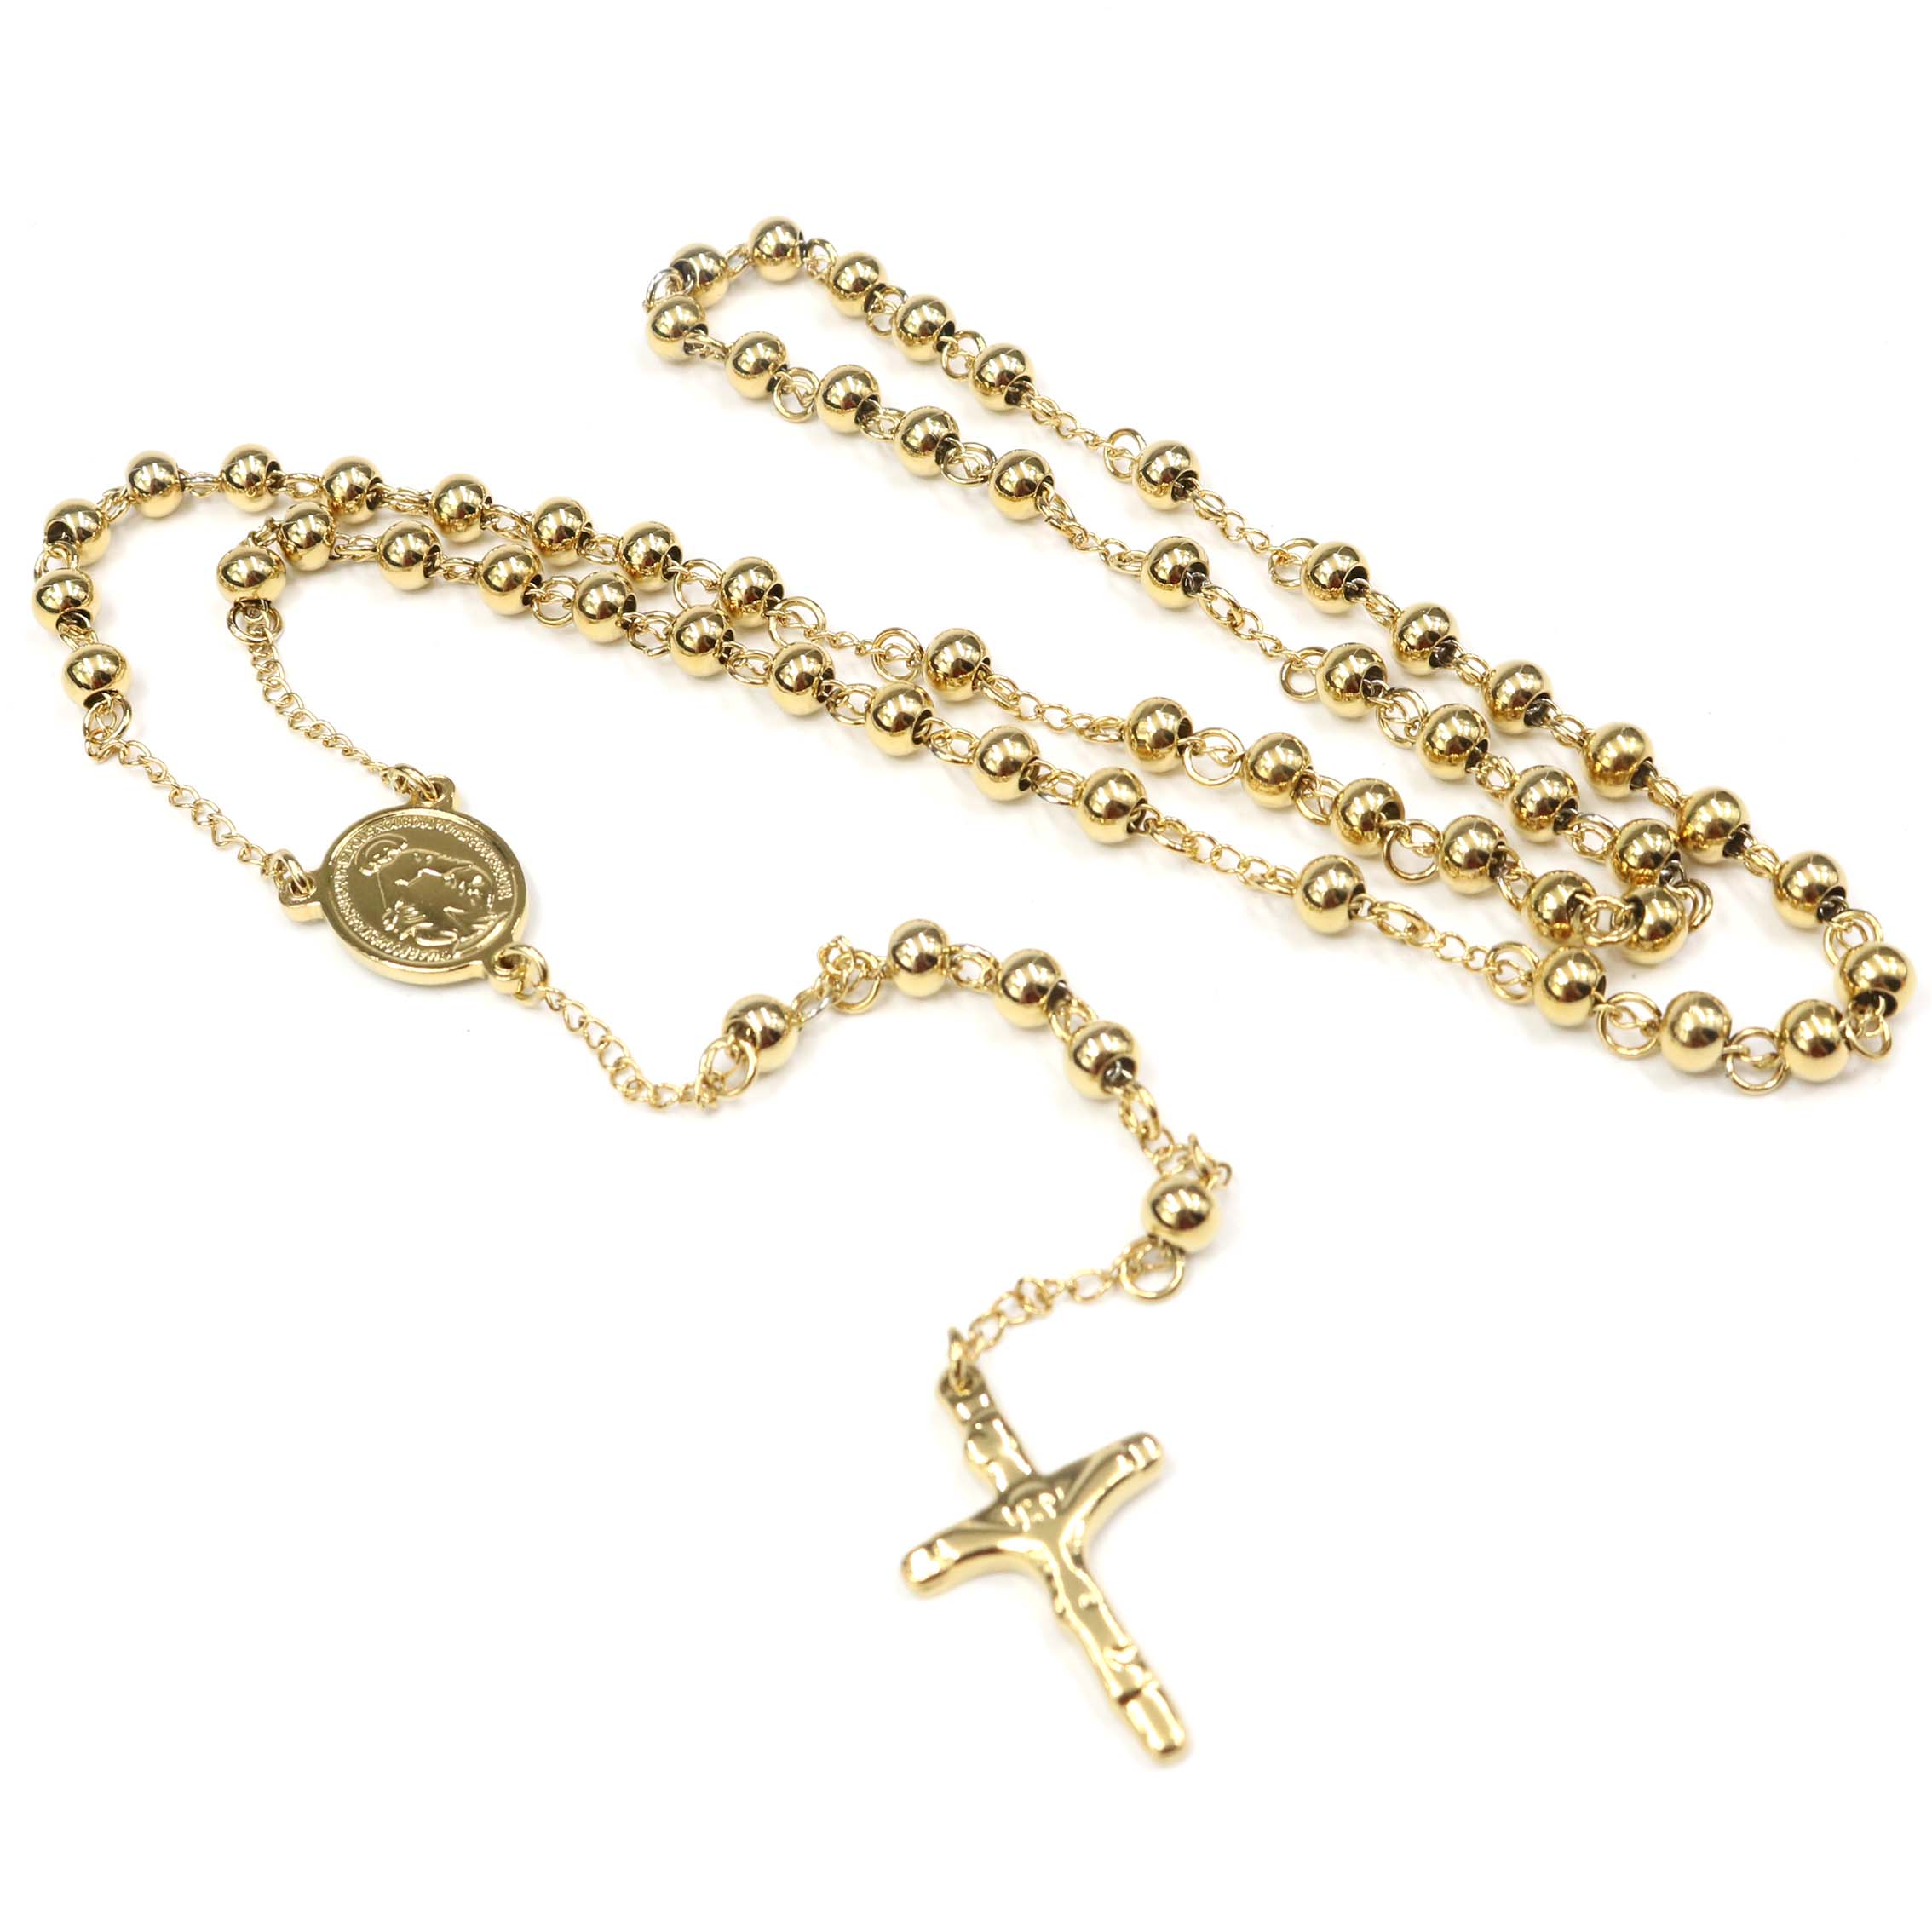 Black Stainless Steel Rosary Necklace